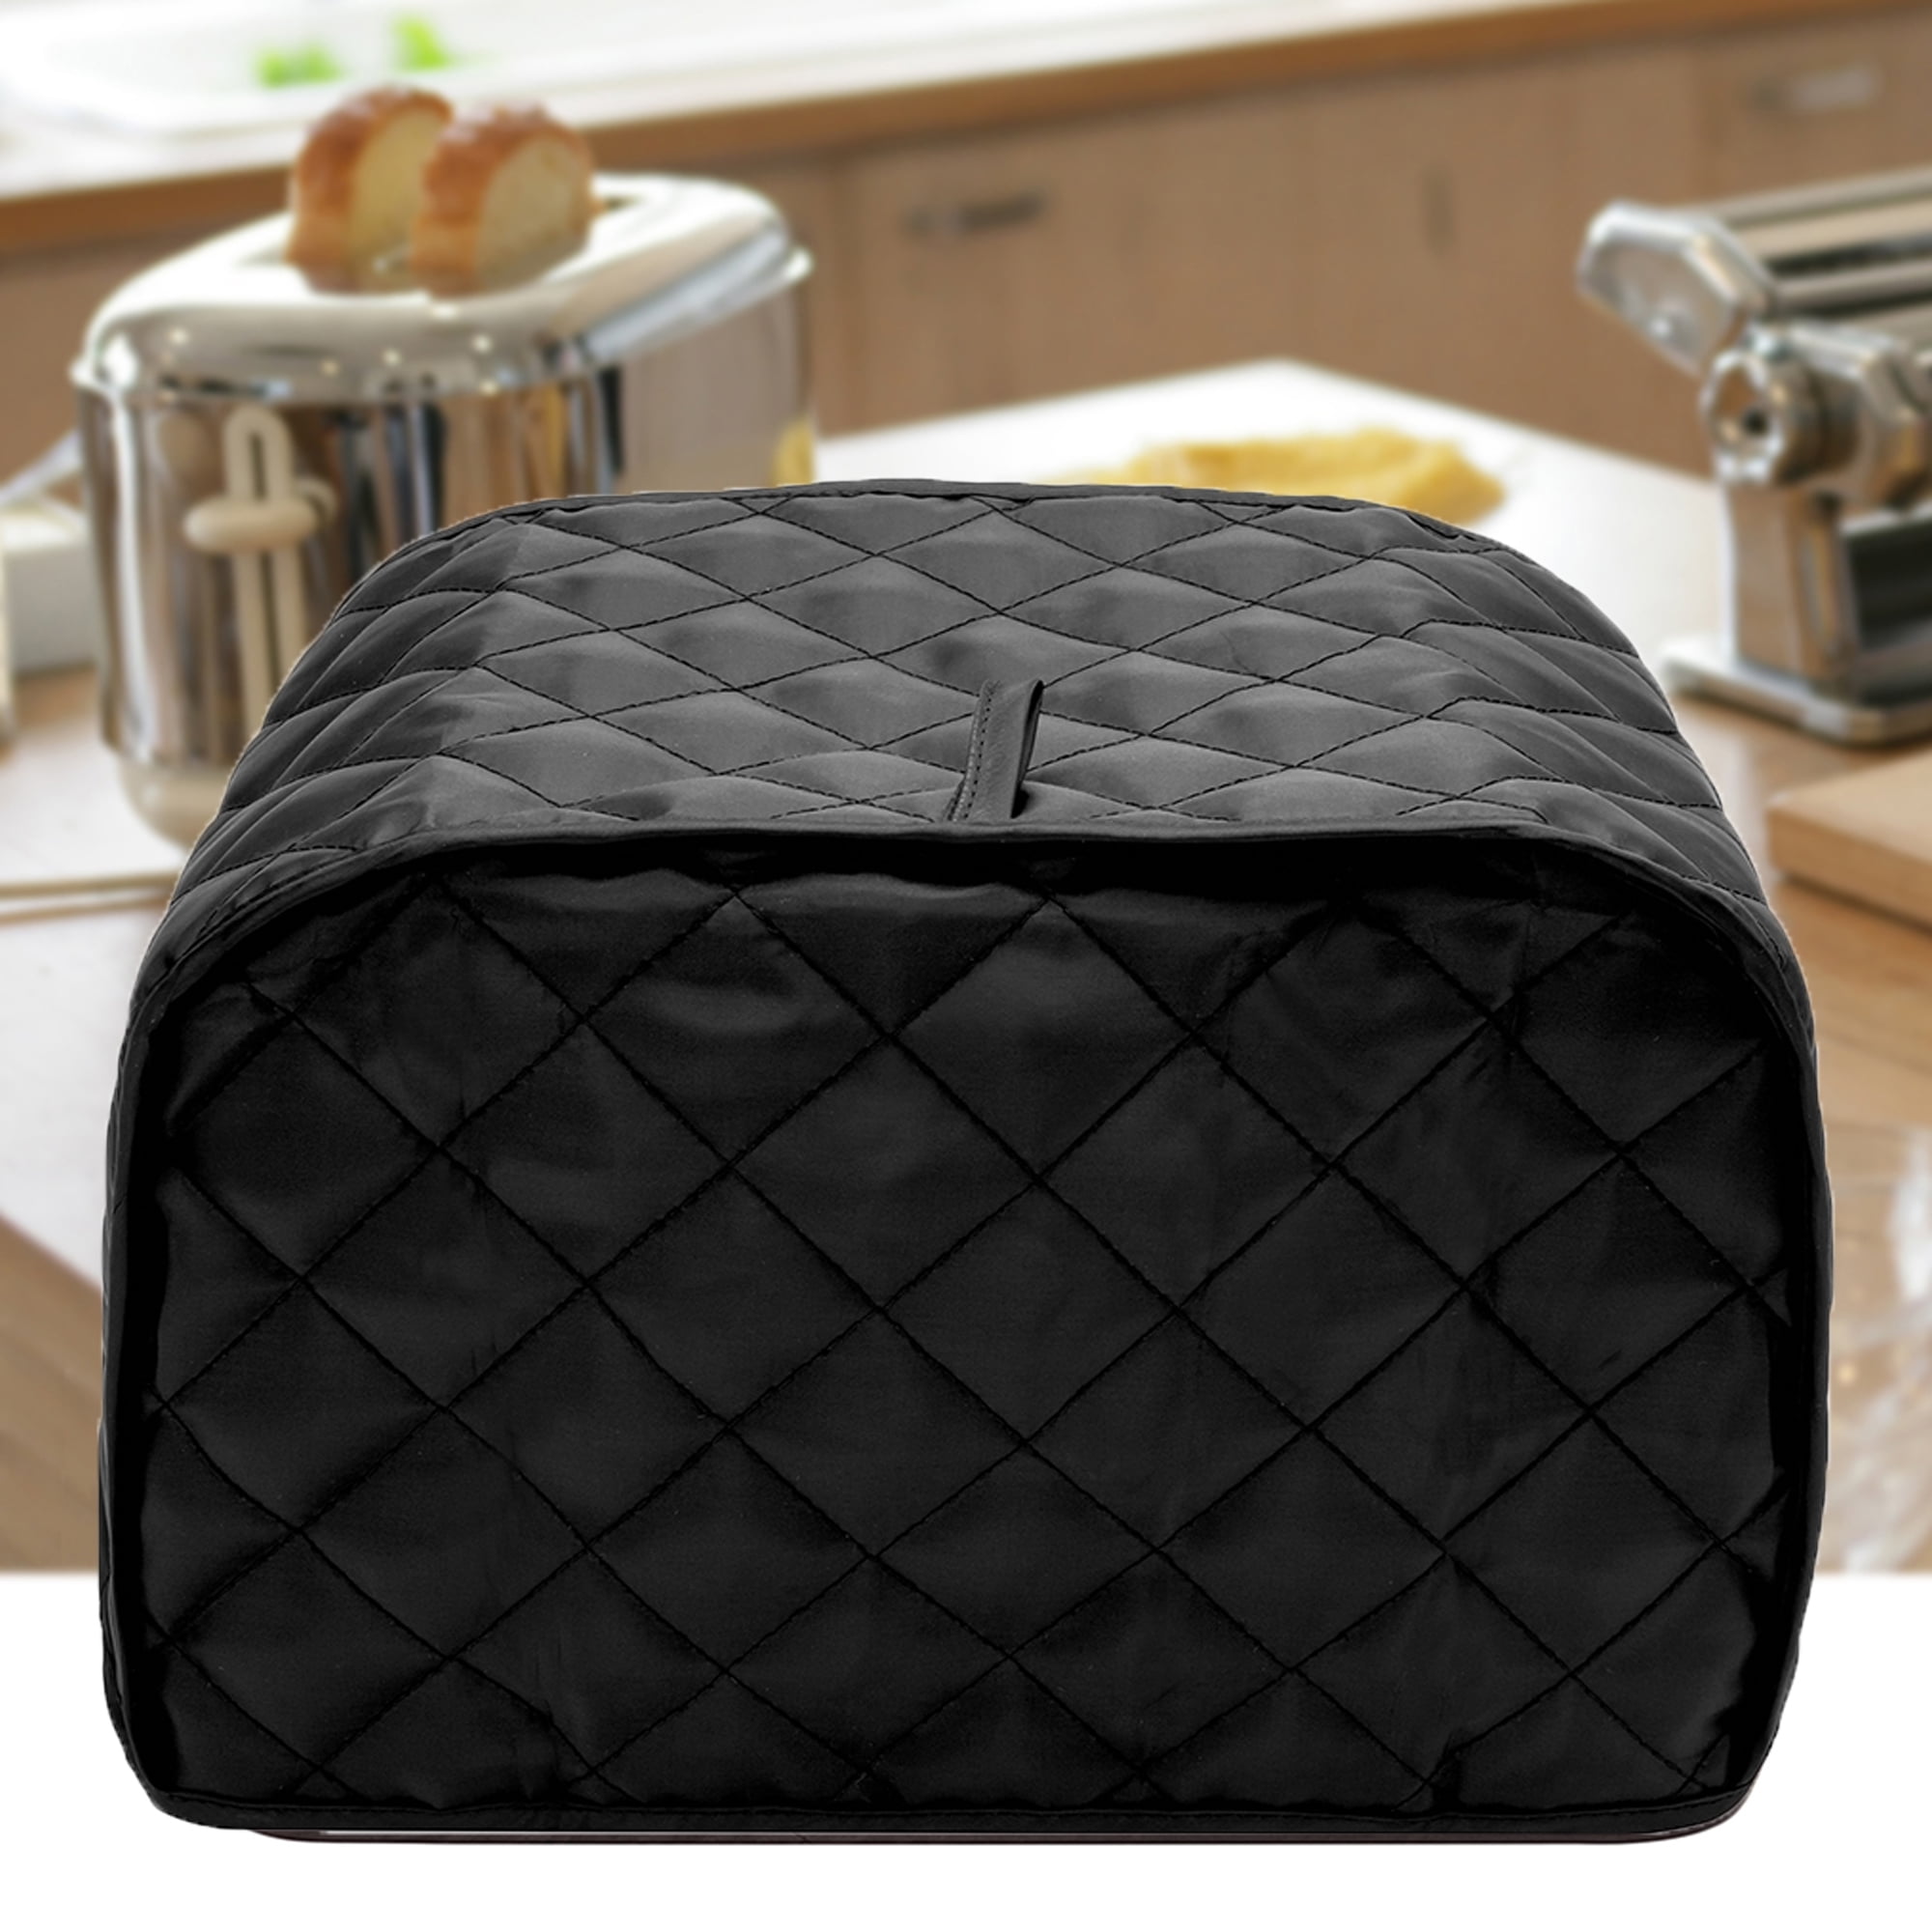 Toaster Cover, Kitchen Small Appliance Cover, Universal Size